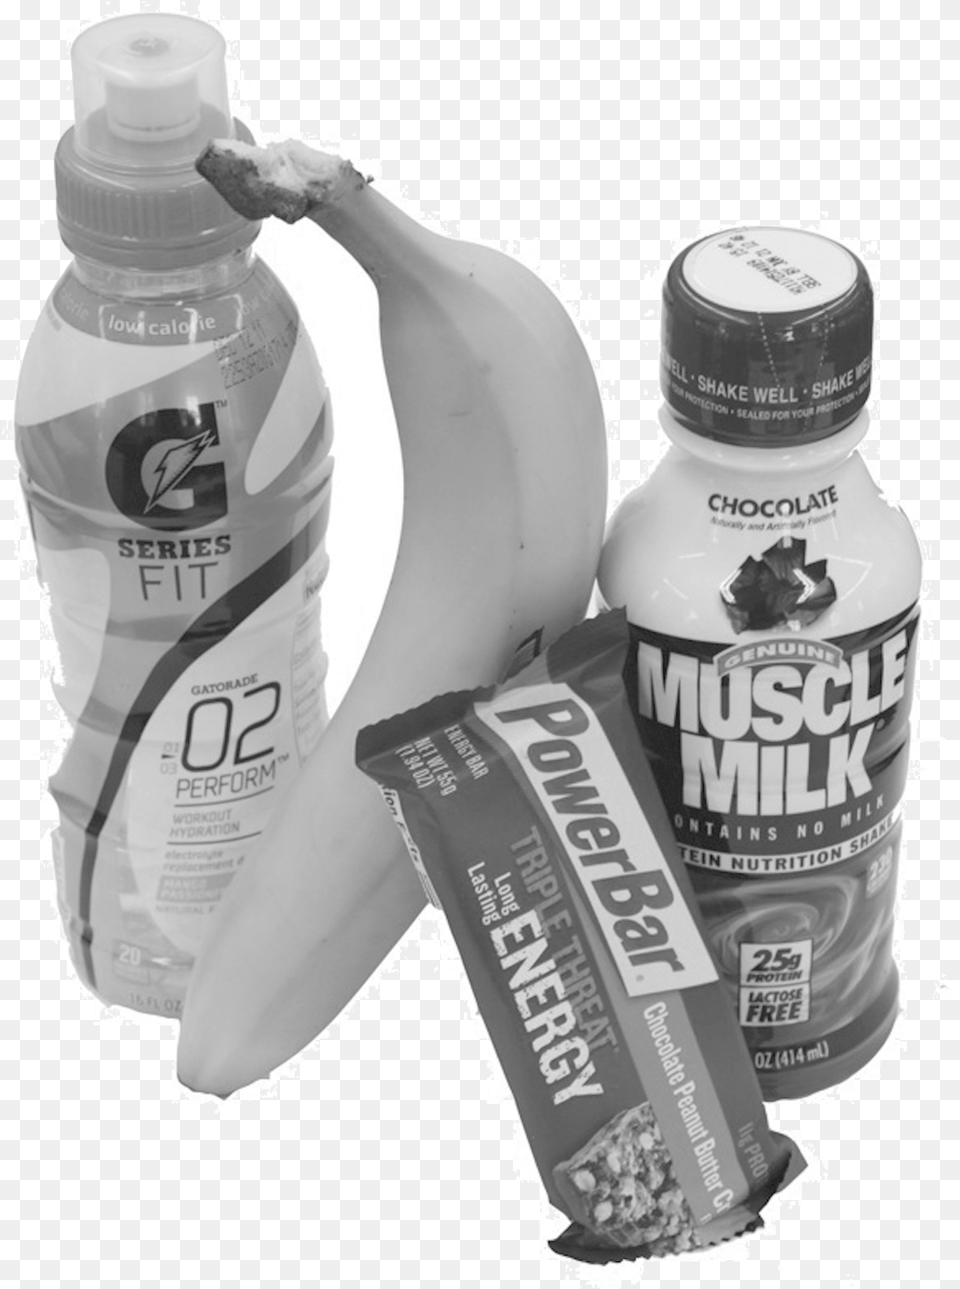 Mix Up Your Pre Work Out Snack With Gatorade Fit A Powerbar Double Chocolate Crisp 15 Bars 65g Harvest, Bottle, Alcohol, Beer, Beverage Png Image